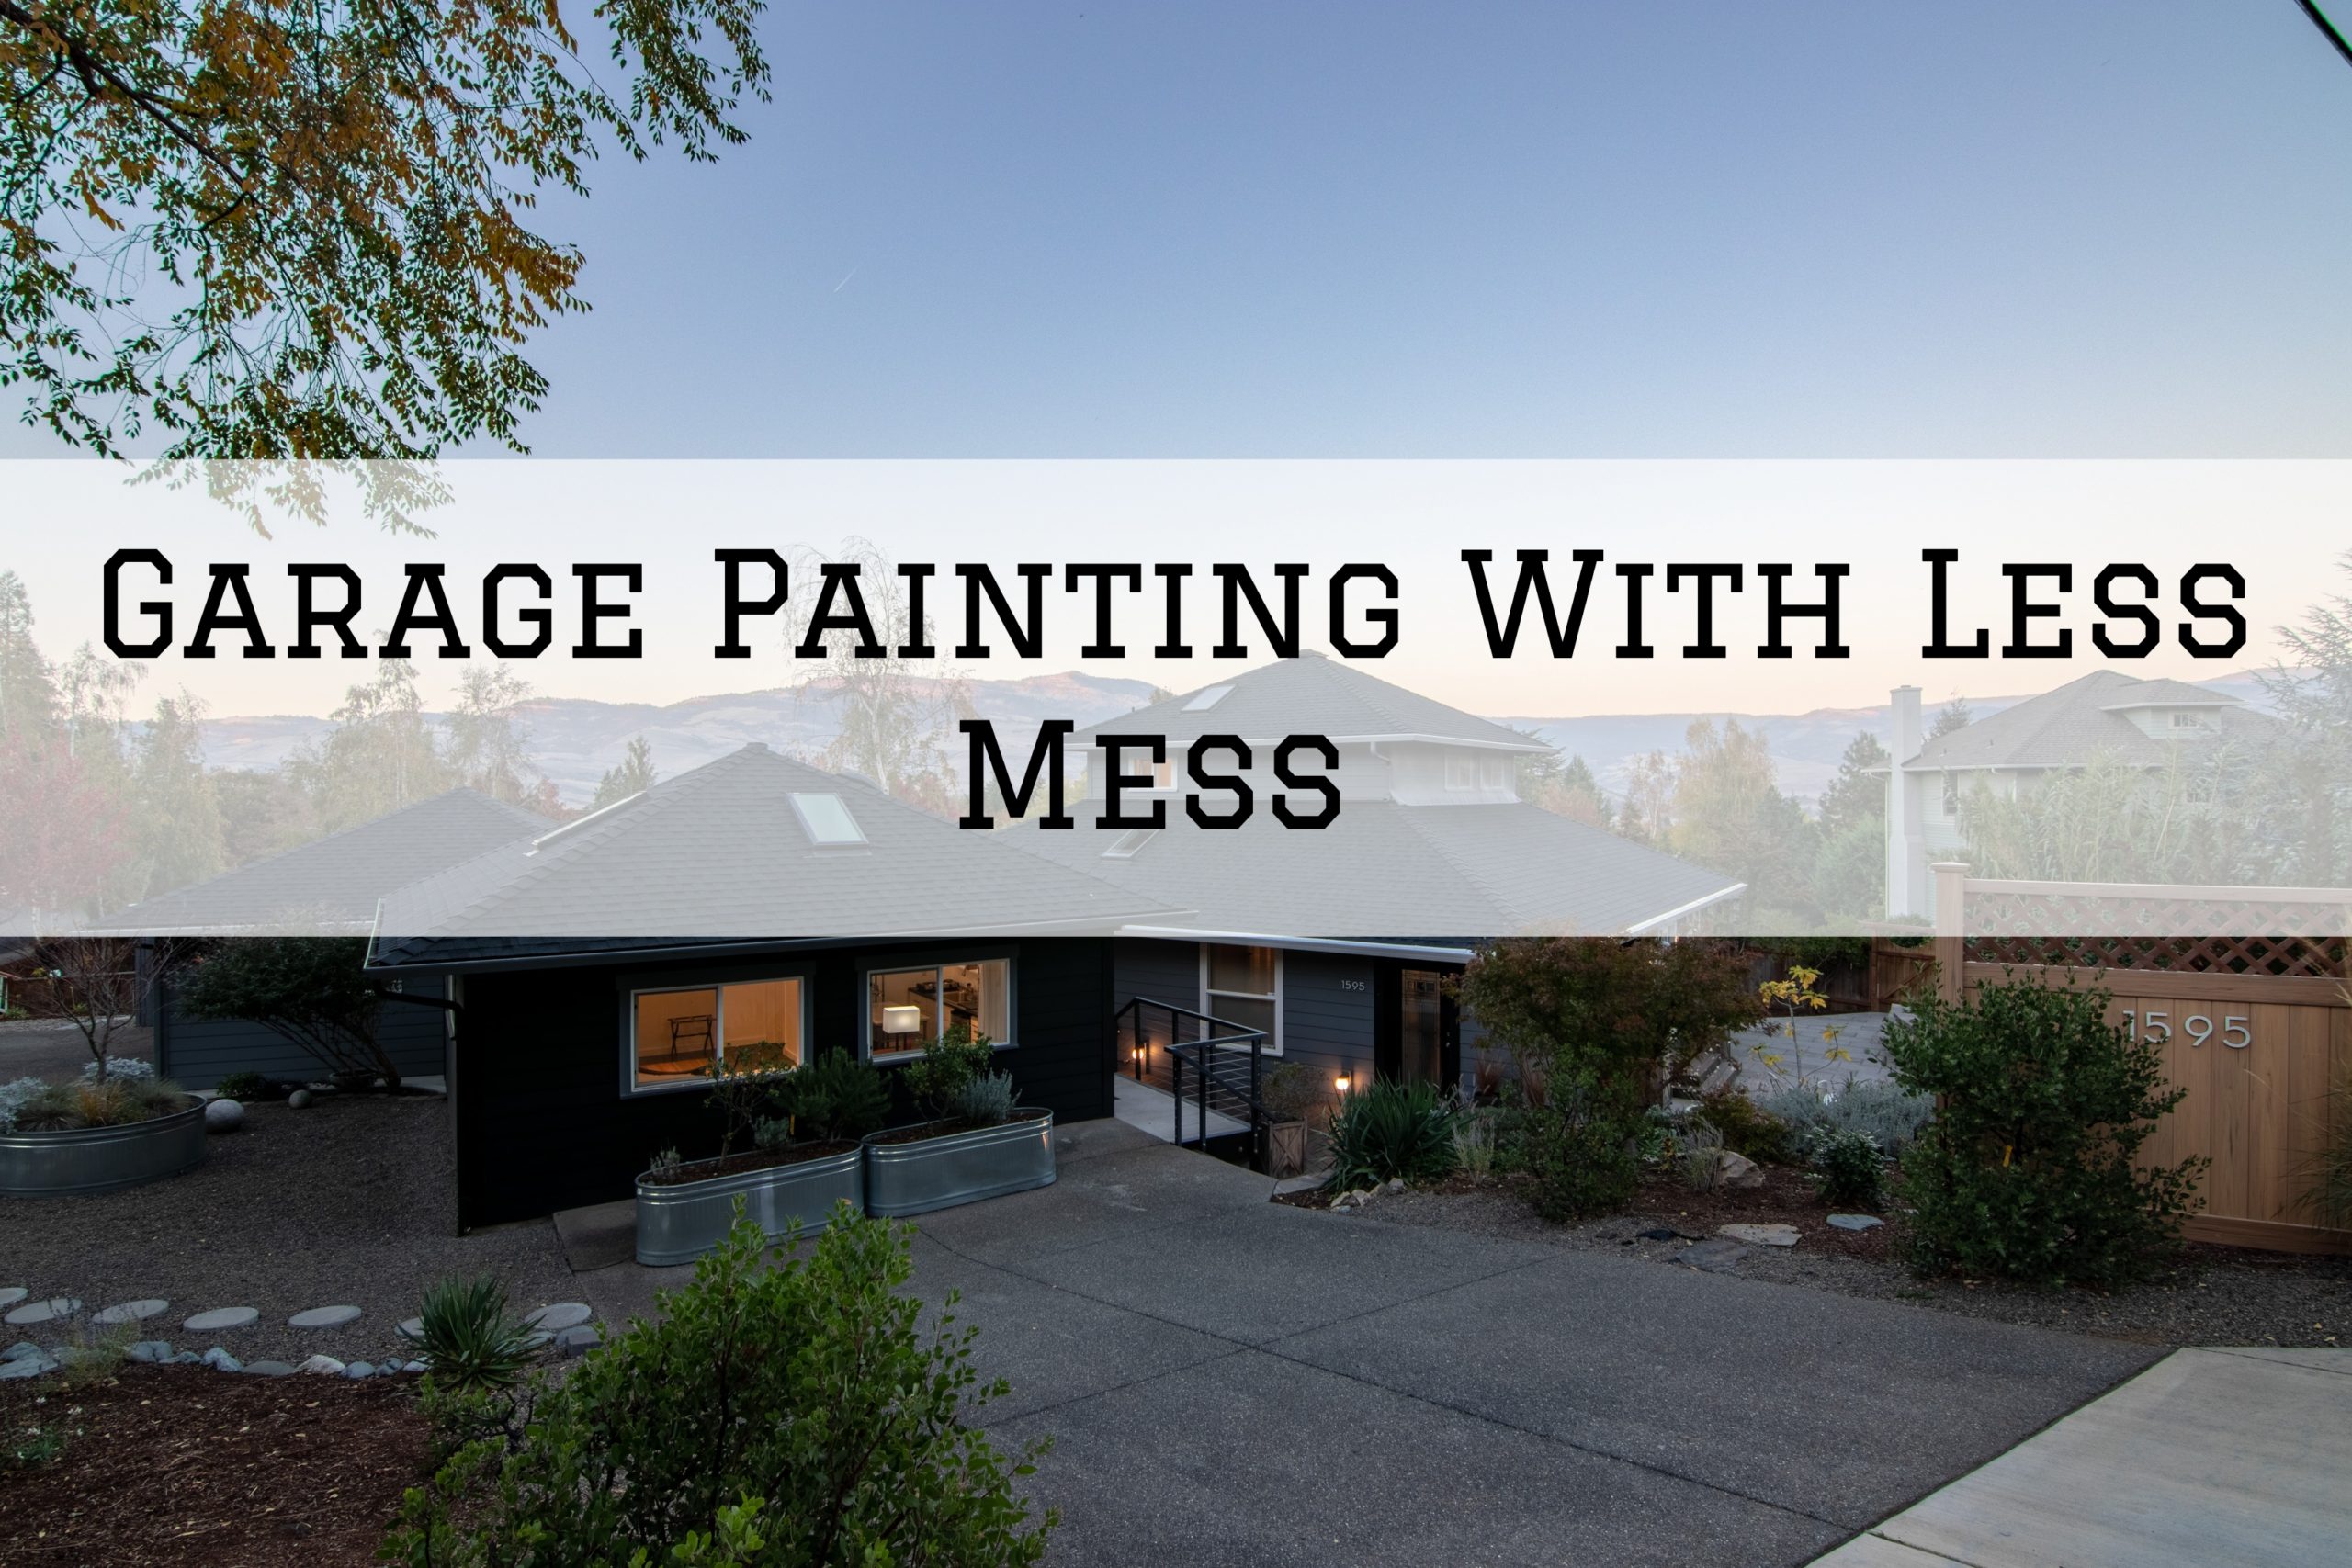 2022-09-06 Left Moon Painting Kennett Square PA Garage Painting Less Mess